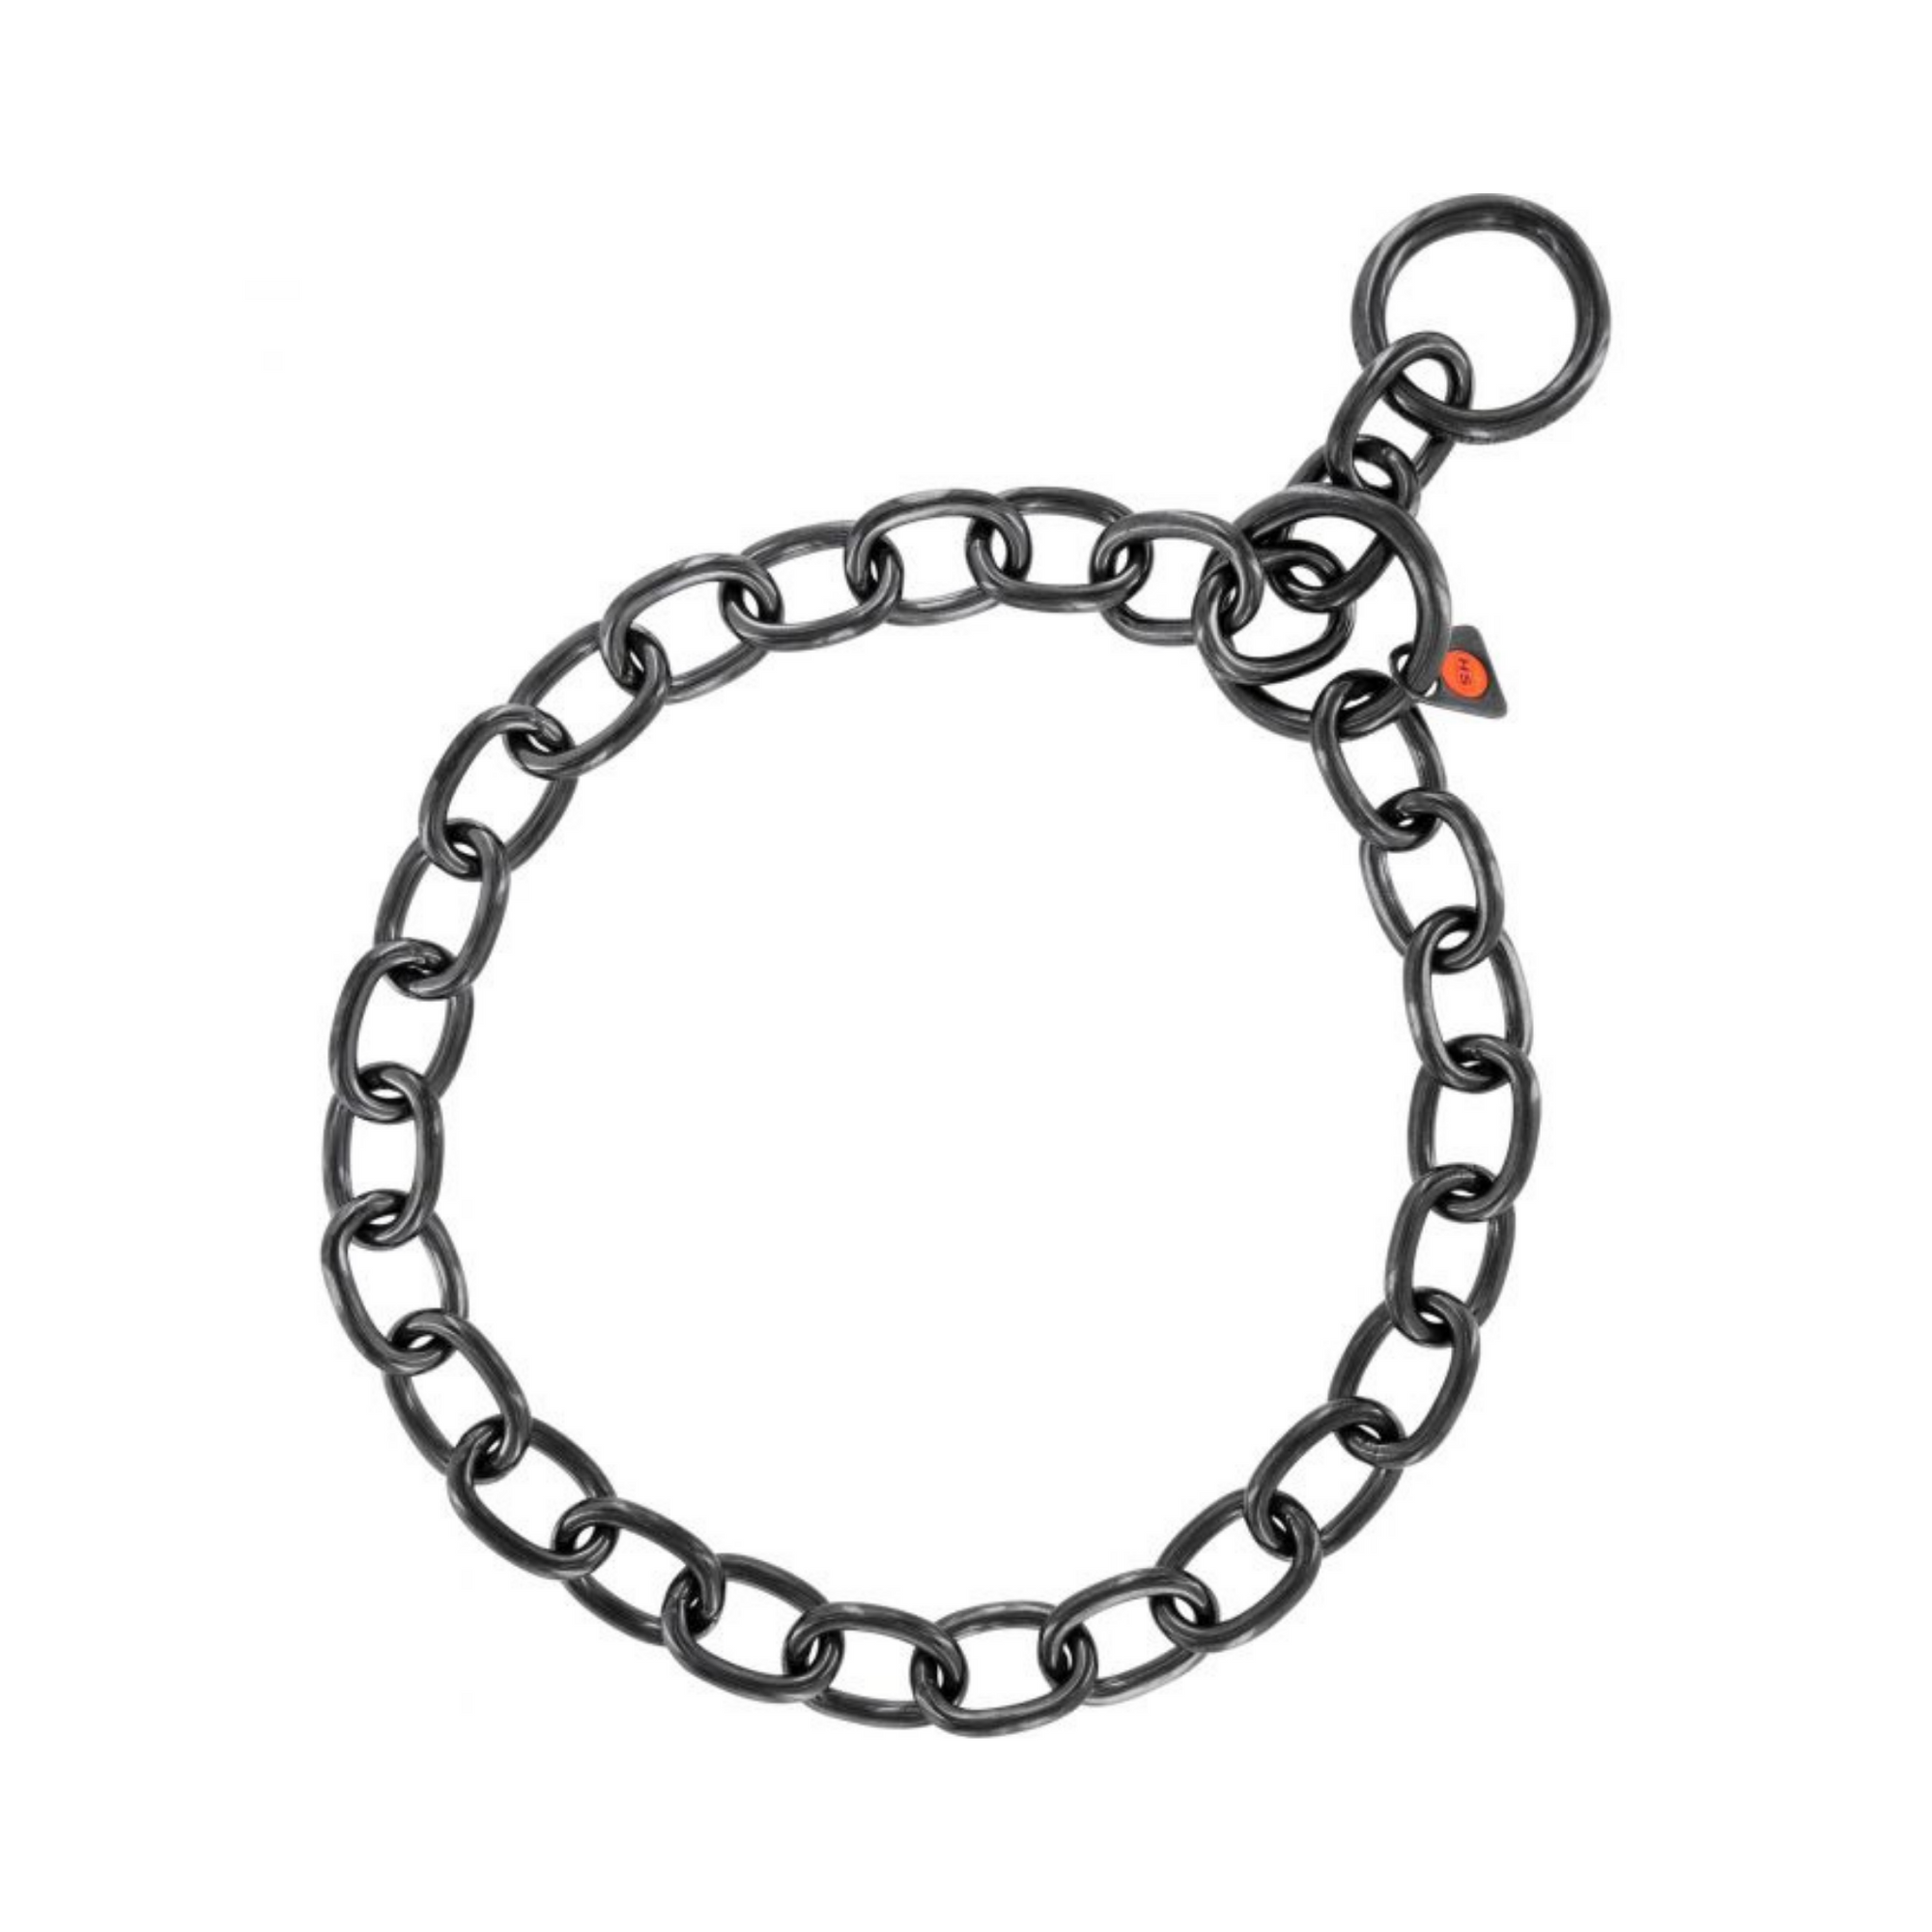 Black German-made neck chains for dogs made of stainless steel